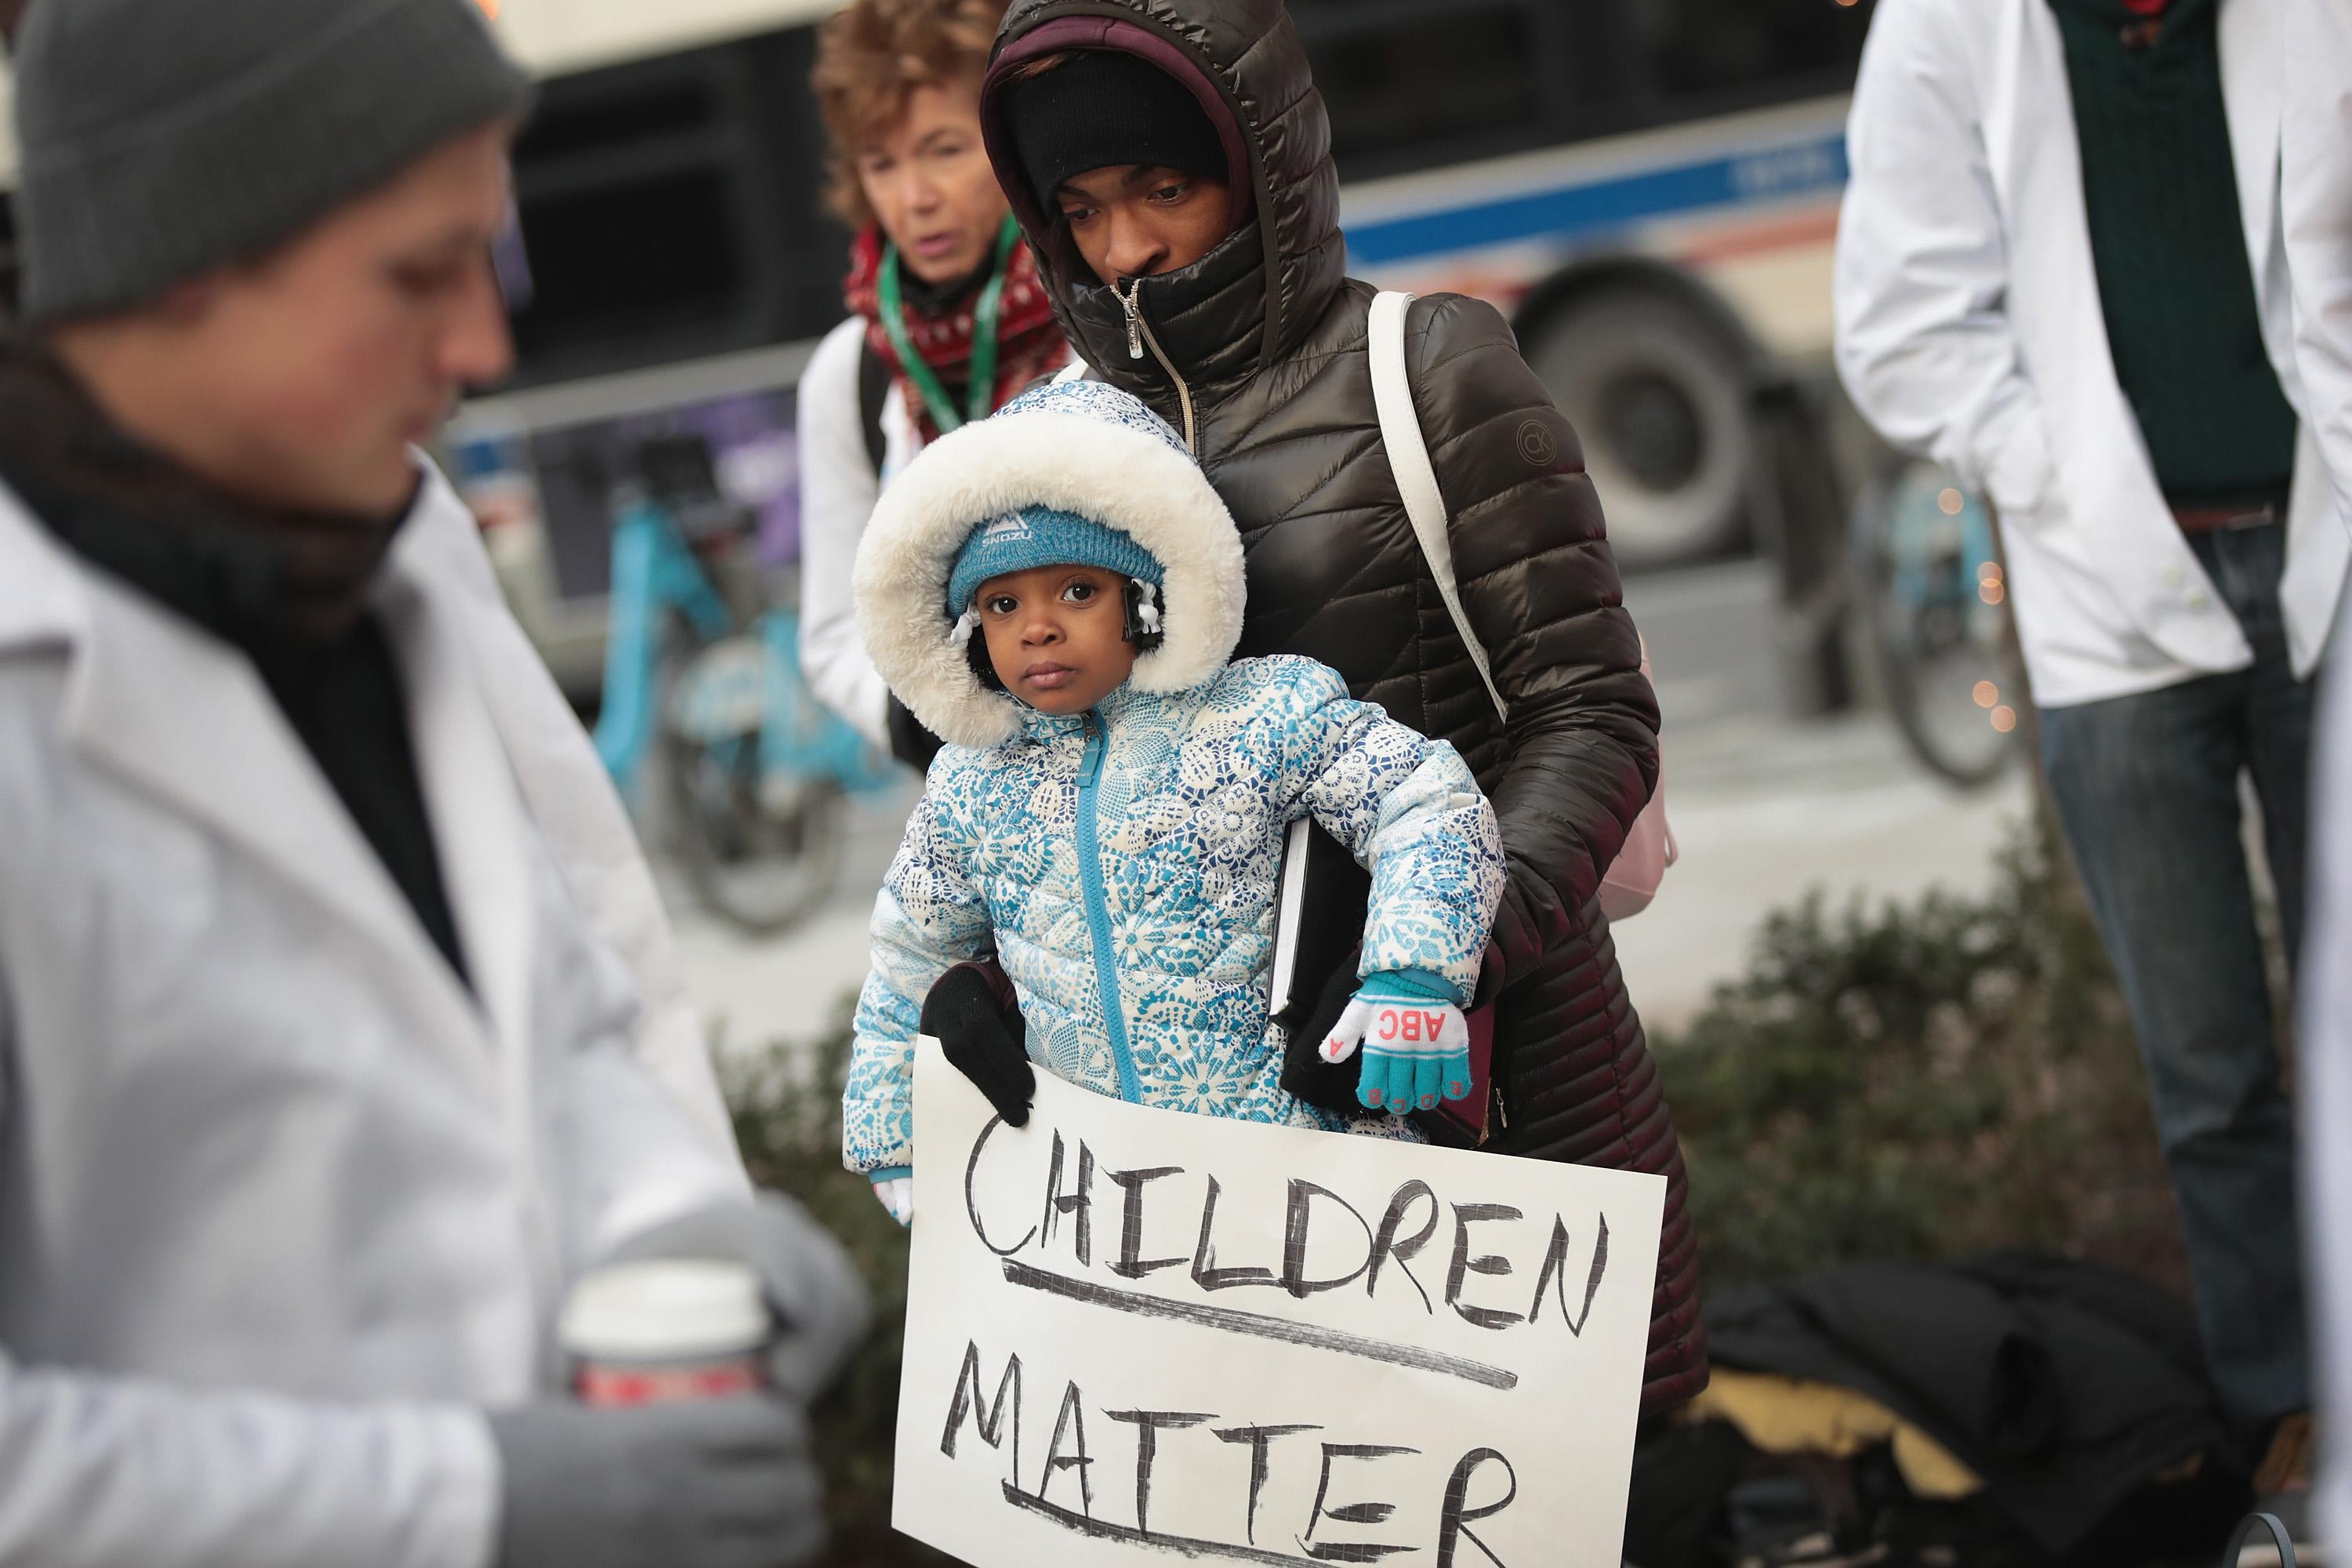 CHICAGO, IL - DECEMBER 14: Melanie Lockridge and her 2-year-old daughter Zariyah attend a rally hosted by University of Chicago medical students to call on Congress to reauthorize funding forthe Children's Health Insurance Program (CHIP) on December 14, 2017 in Chicago, Illinois. On September 30, congress let funding for CHIP expire, leaving states to carry the burden for medical expenses of the 9 million children enrolled in the program. Lockeridge's two daughters were enrolled in the program.  (Photo by Scott Olson/Getty Images)